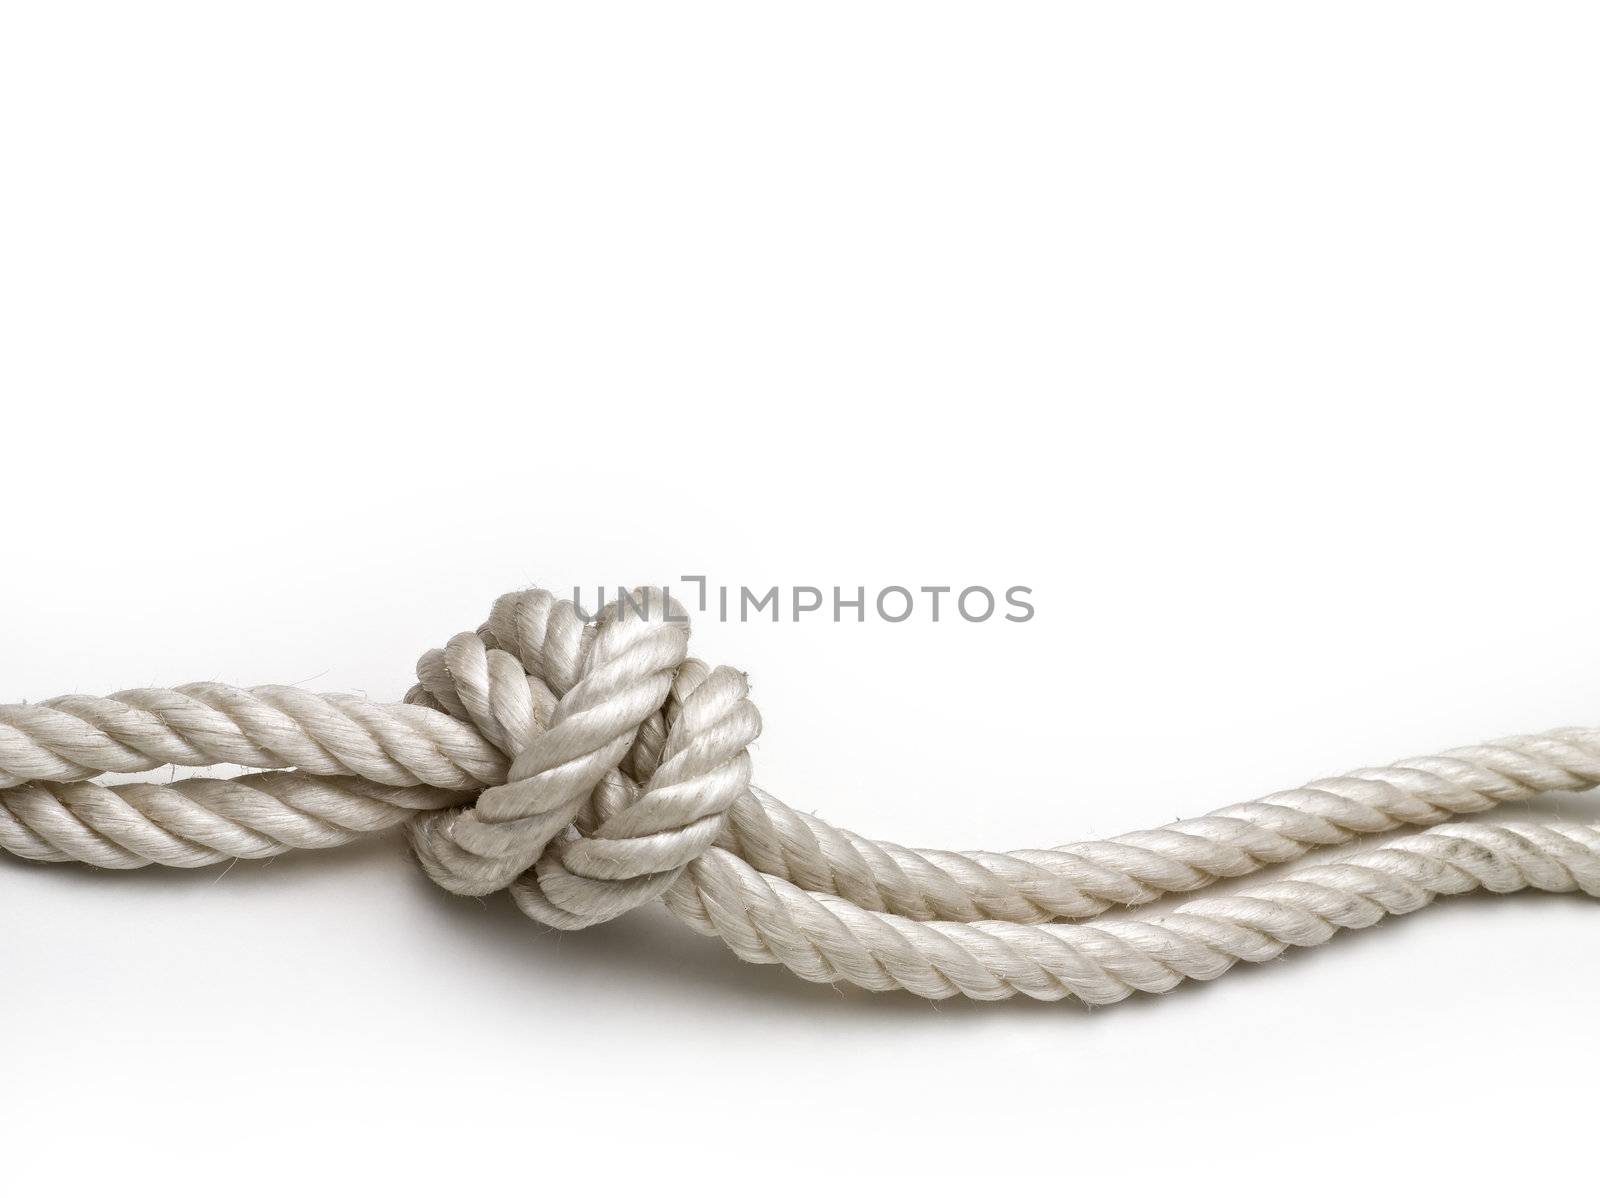 Rope with a knot by pbombaert